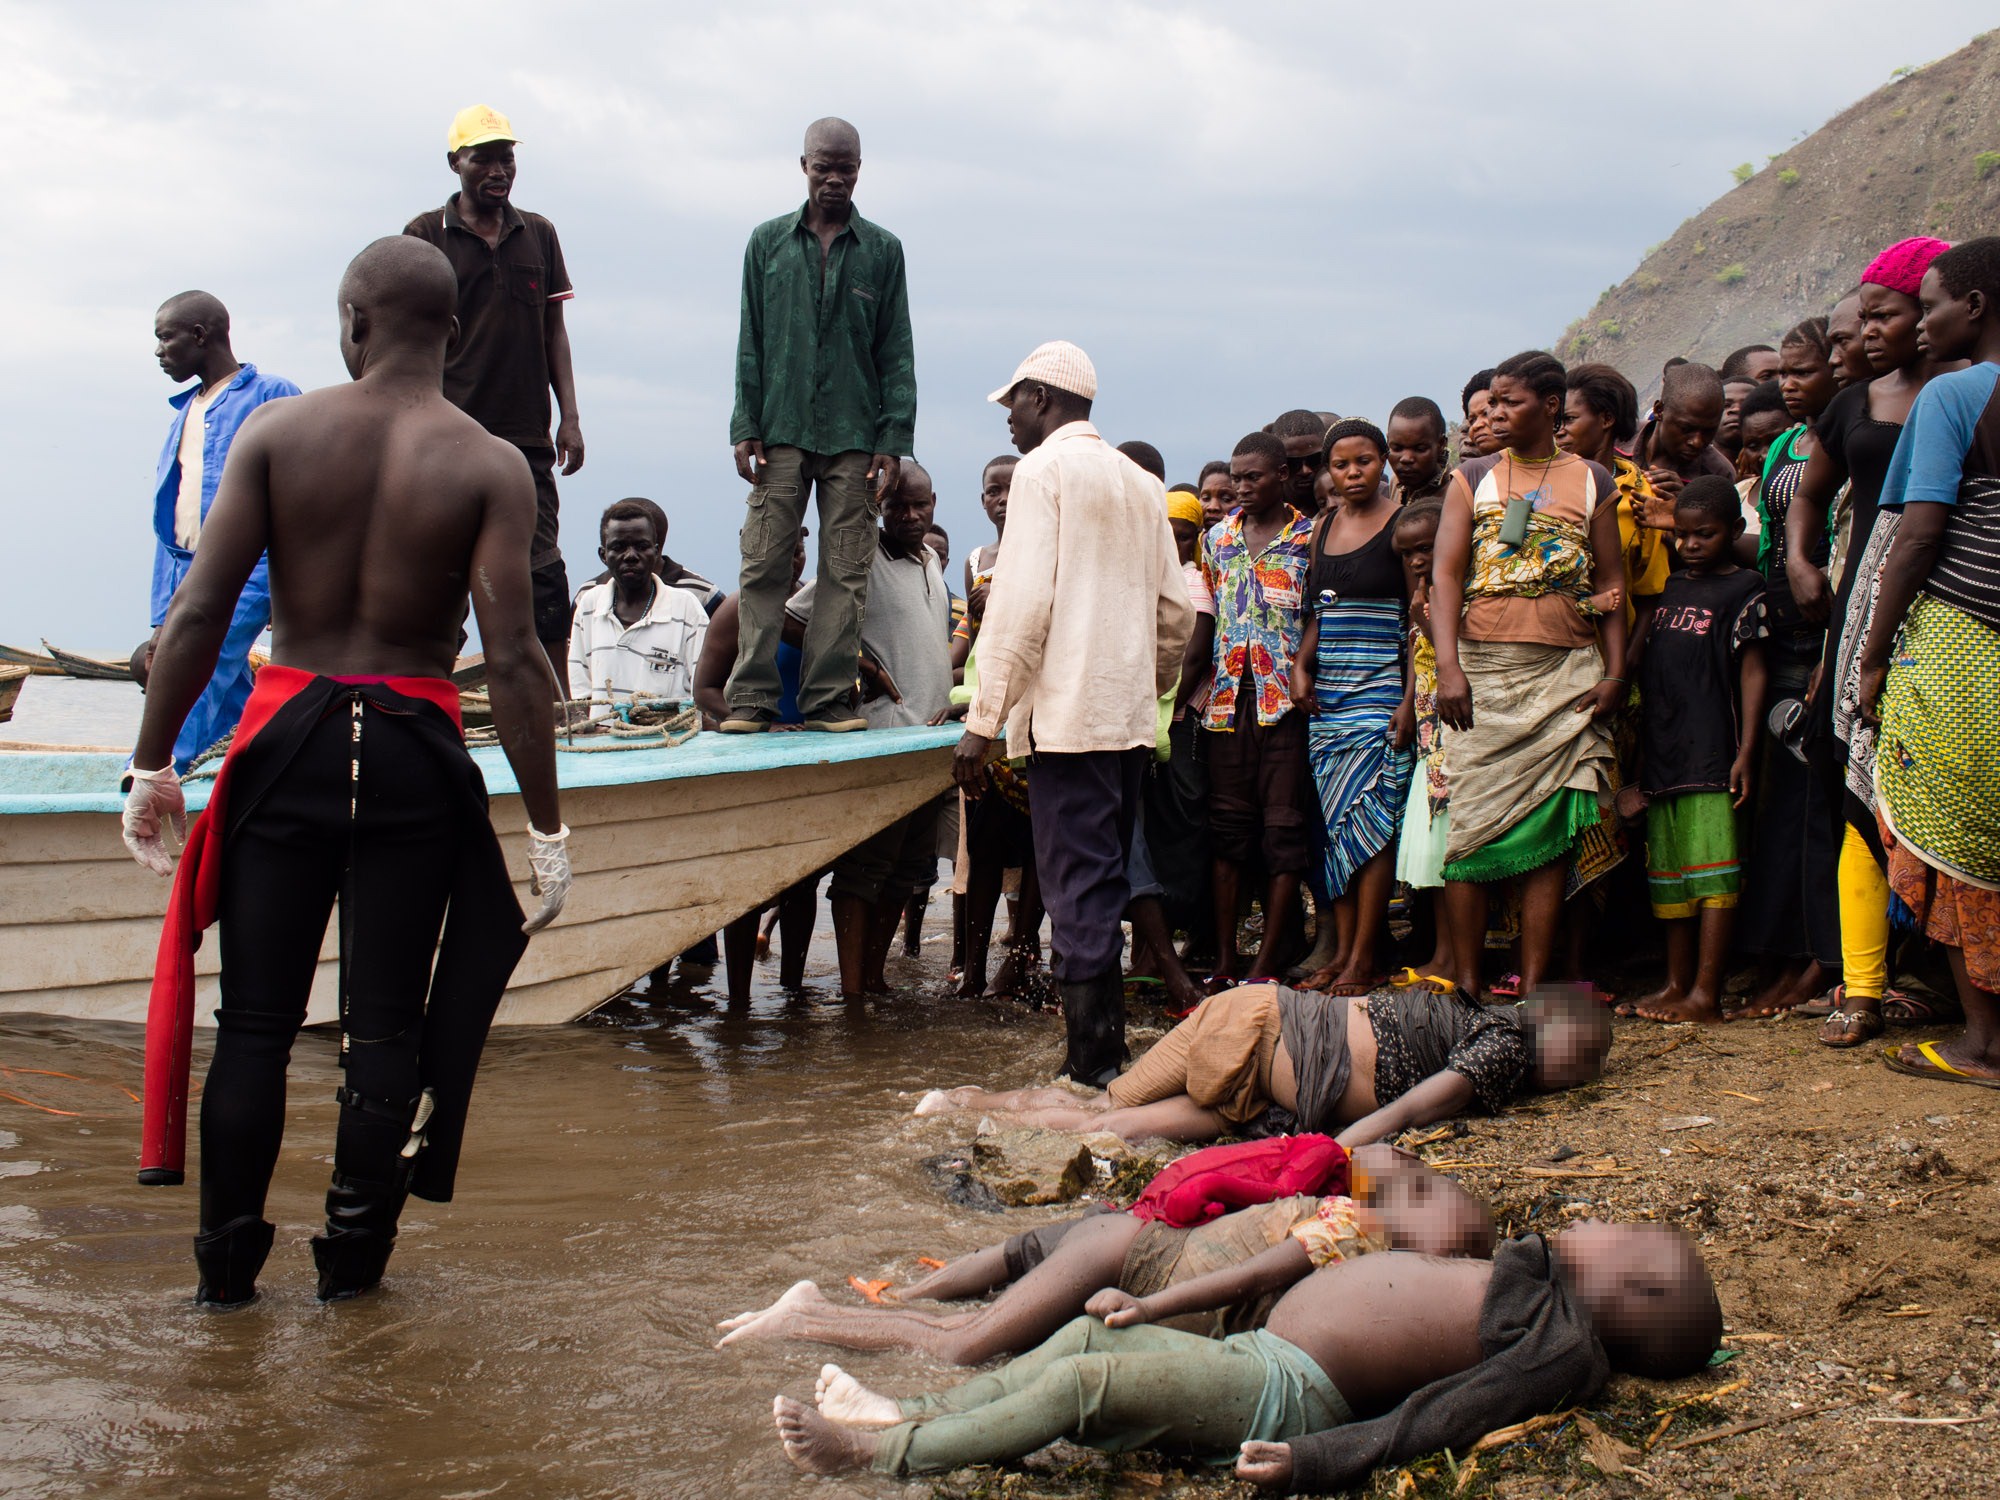 GRAPHIC CONTENT People stand near the bodies retrieved by the Ugandan Police divers, on the shore of Lake Albert in Kitebere landing site on March 23, 2013. As many as 60 people are feared to have drowned when a boat capsized on Lake Albert on the border between Uganda and Democratic Republic of Congo, reports said on March 22. Uganda's Daily Monitor newspaper said the boat, travelling between two districts in western Uganda, capsized shortly before midday Saturday. "We have also recovered 19 bodies but we expect more bodies," local official Oscar Chunyai was quoted as saying. He added that dozens more people had been rescued by fisherman who saw the accident. The boat was reportedly carrying 100 people, many of them refugees from the DRC, The New Vision newspaper said, adding that 15 bodies of children had also been recovered. The number rescued so far pointed to a potential death toll of anywhere between up to 50 or 60 dead, Ugandan media reports said. AFP PHOTO/Michele Sibiloni (Photo credit should read MICHELE SIBILONI/AFP/Getty Images)